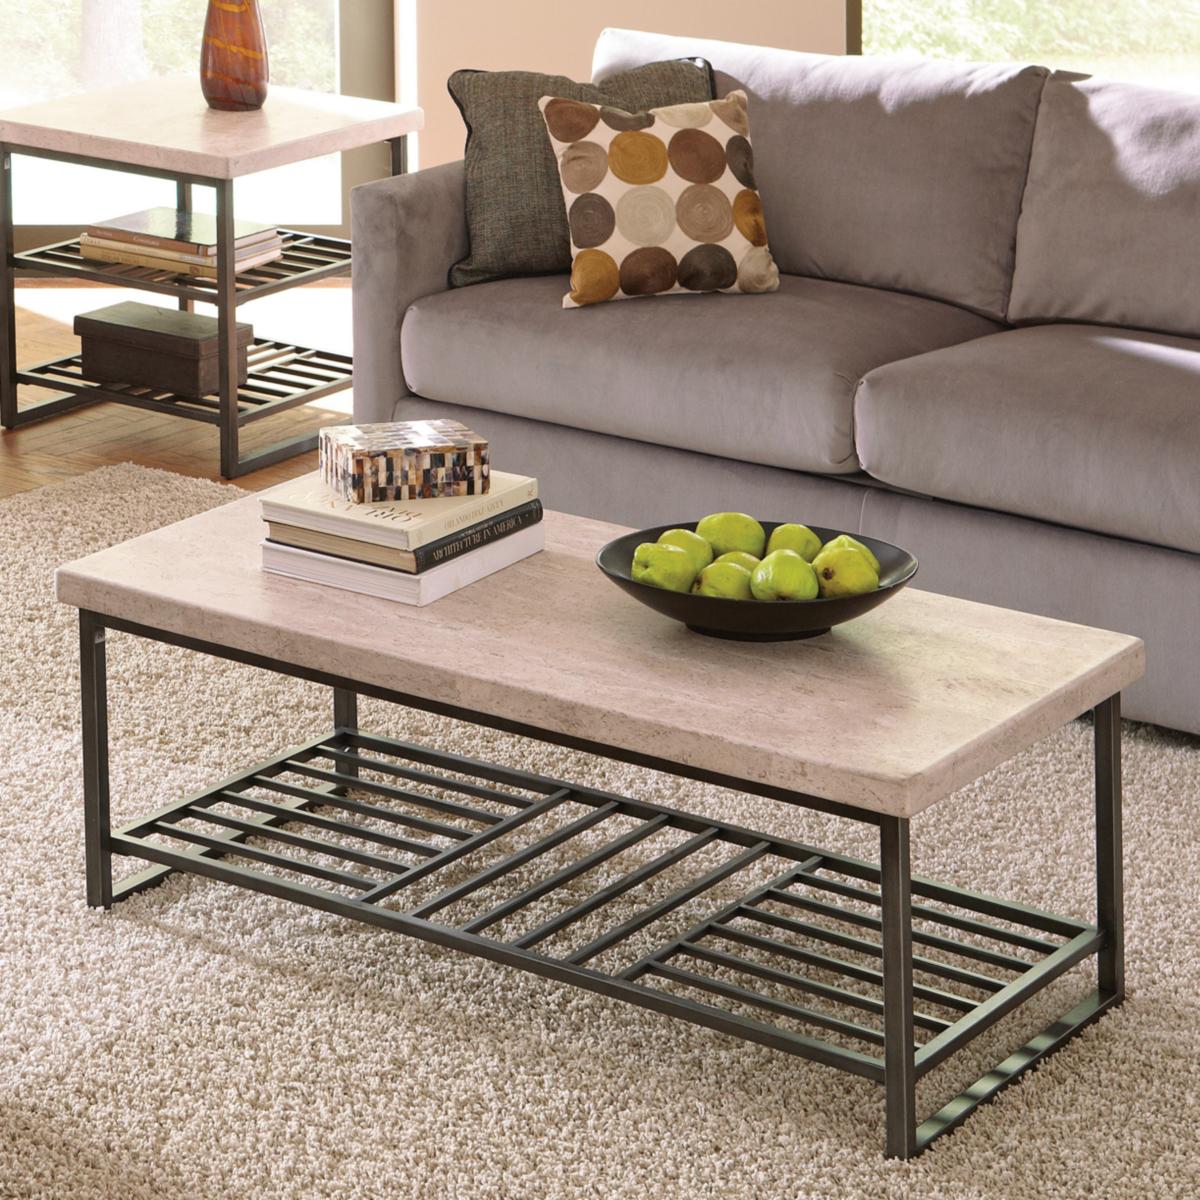 Coffee Table Size Guide: What You Need to Know